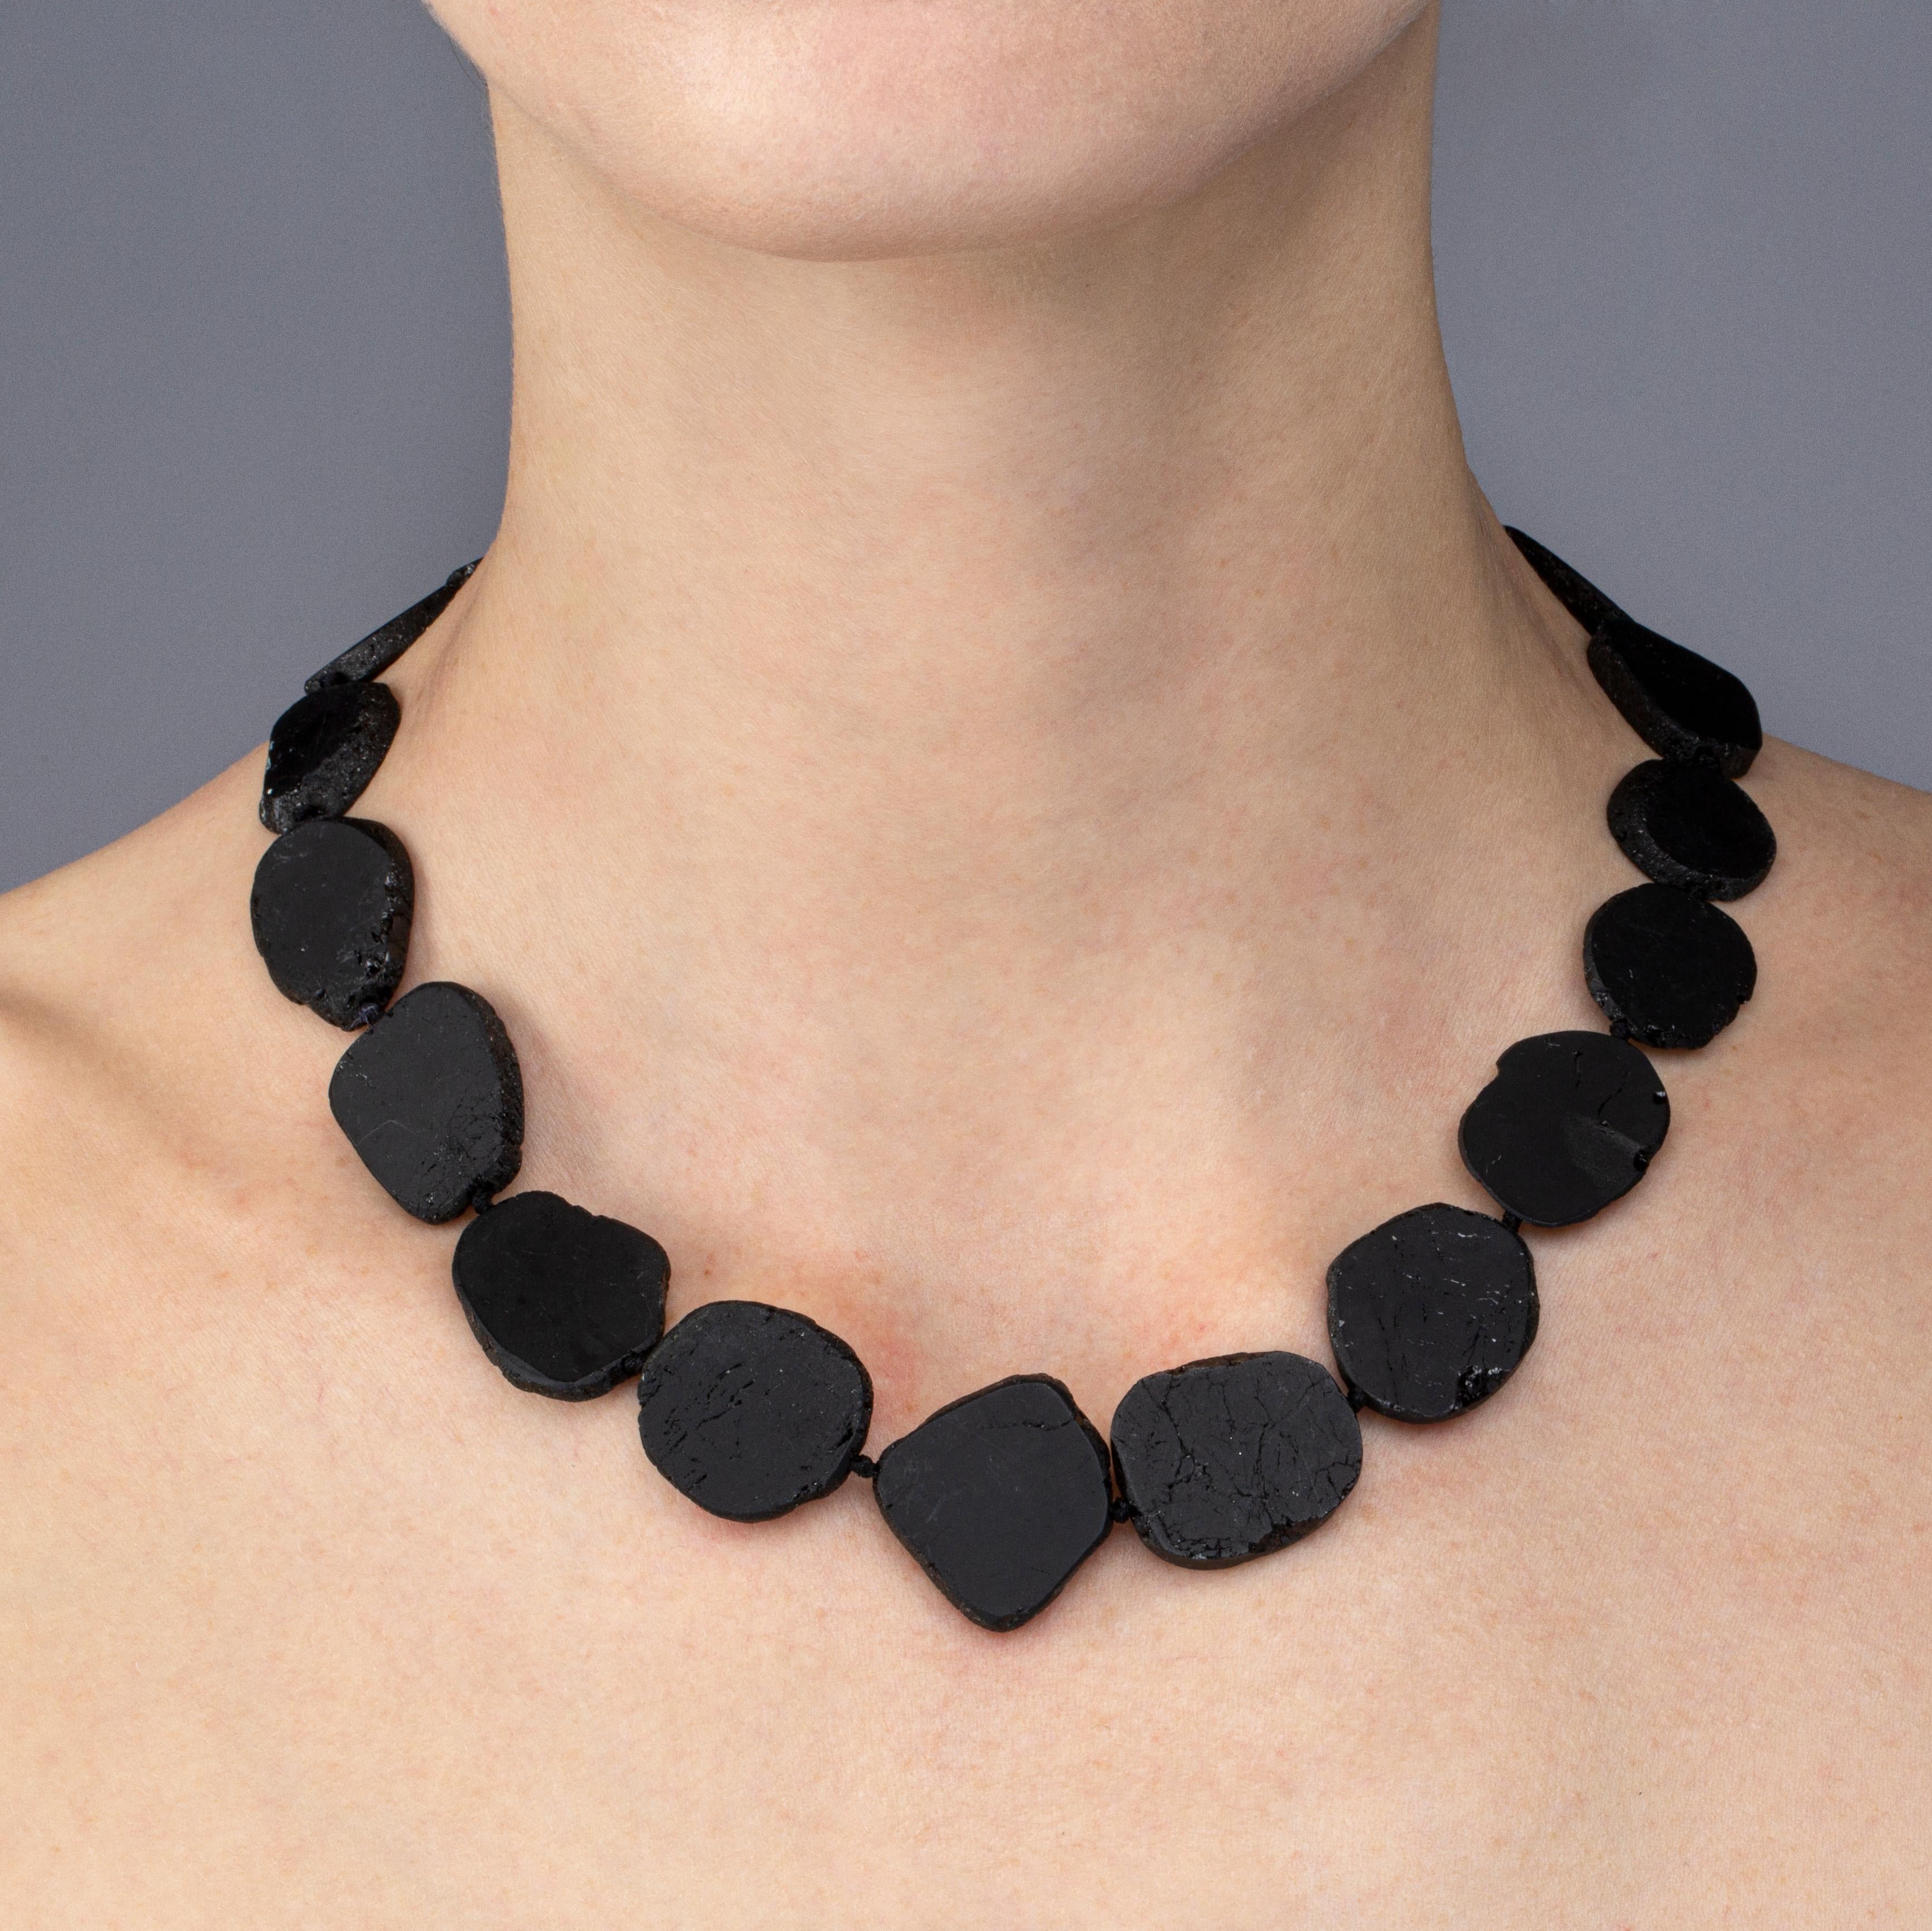 Jona design collection black tourmaline necklace with brushed sterling silver clasp. 
Dimensions: L x 18.89 in., W x 1.14 in. / L x 48 cm, W x 2.9 cm
All Jona jewelry is new and has never been previously owned or worn. Each item will arrive at your